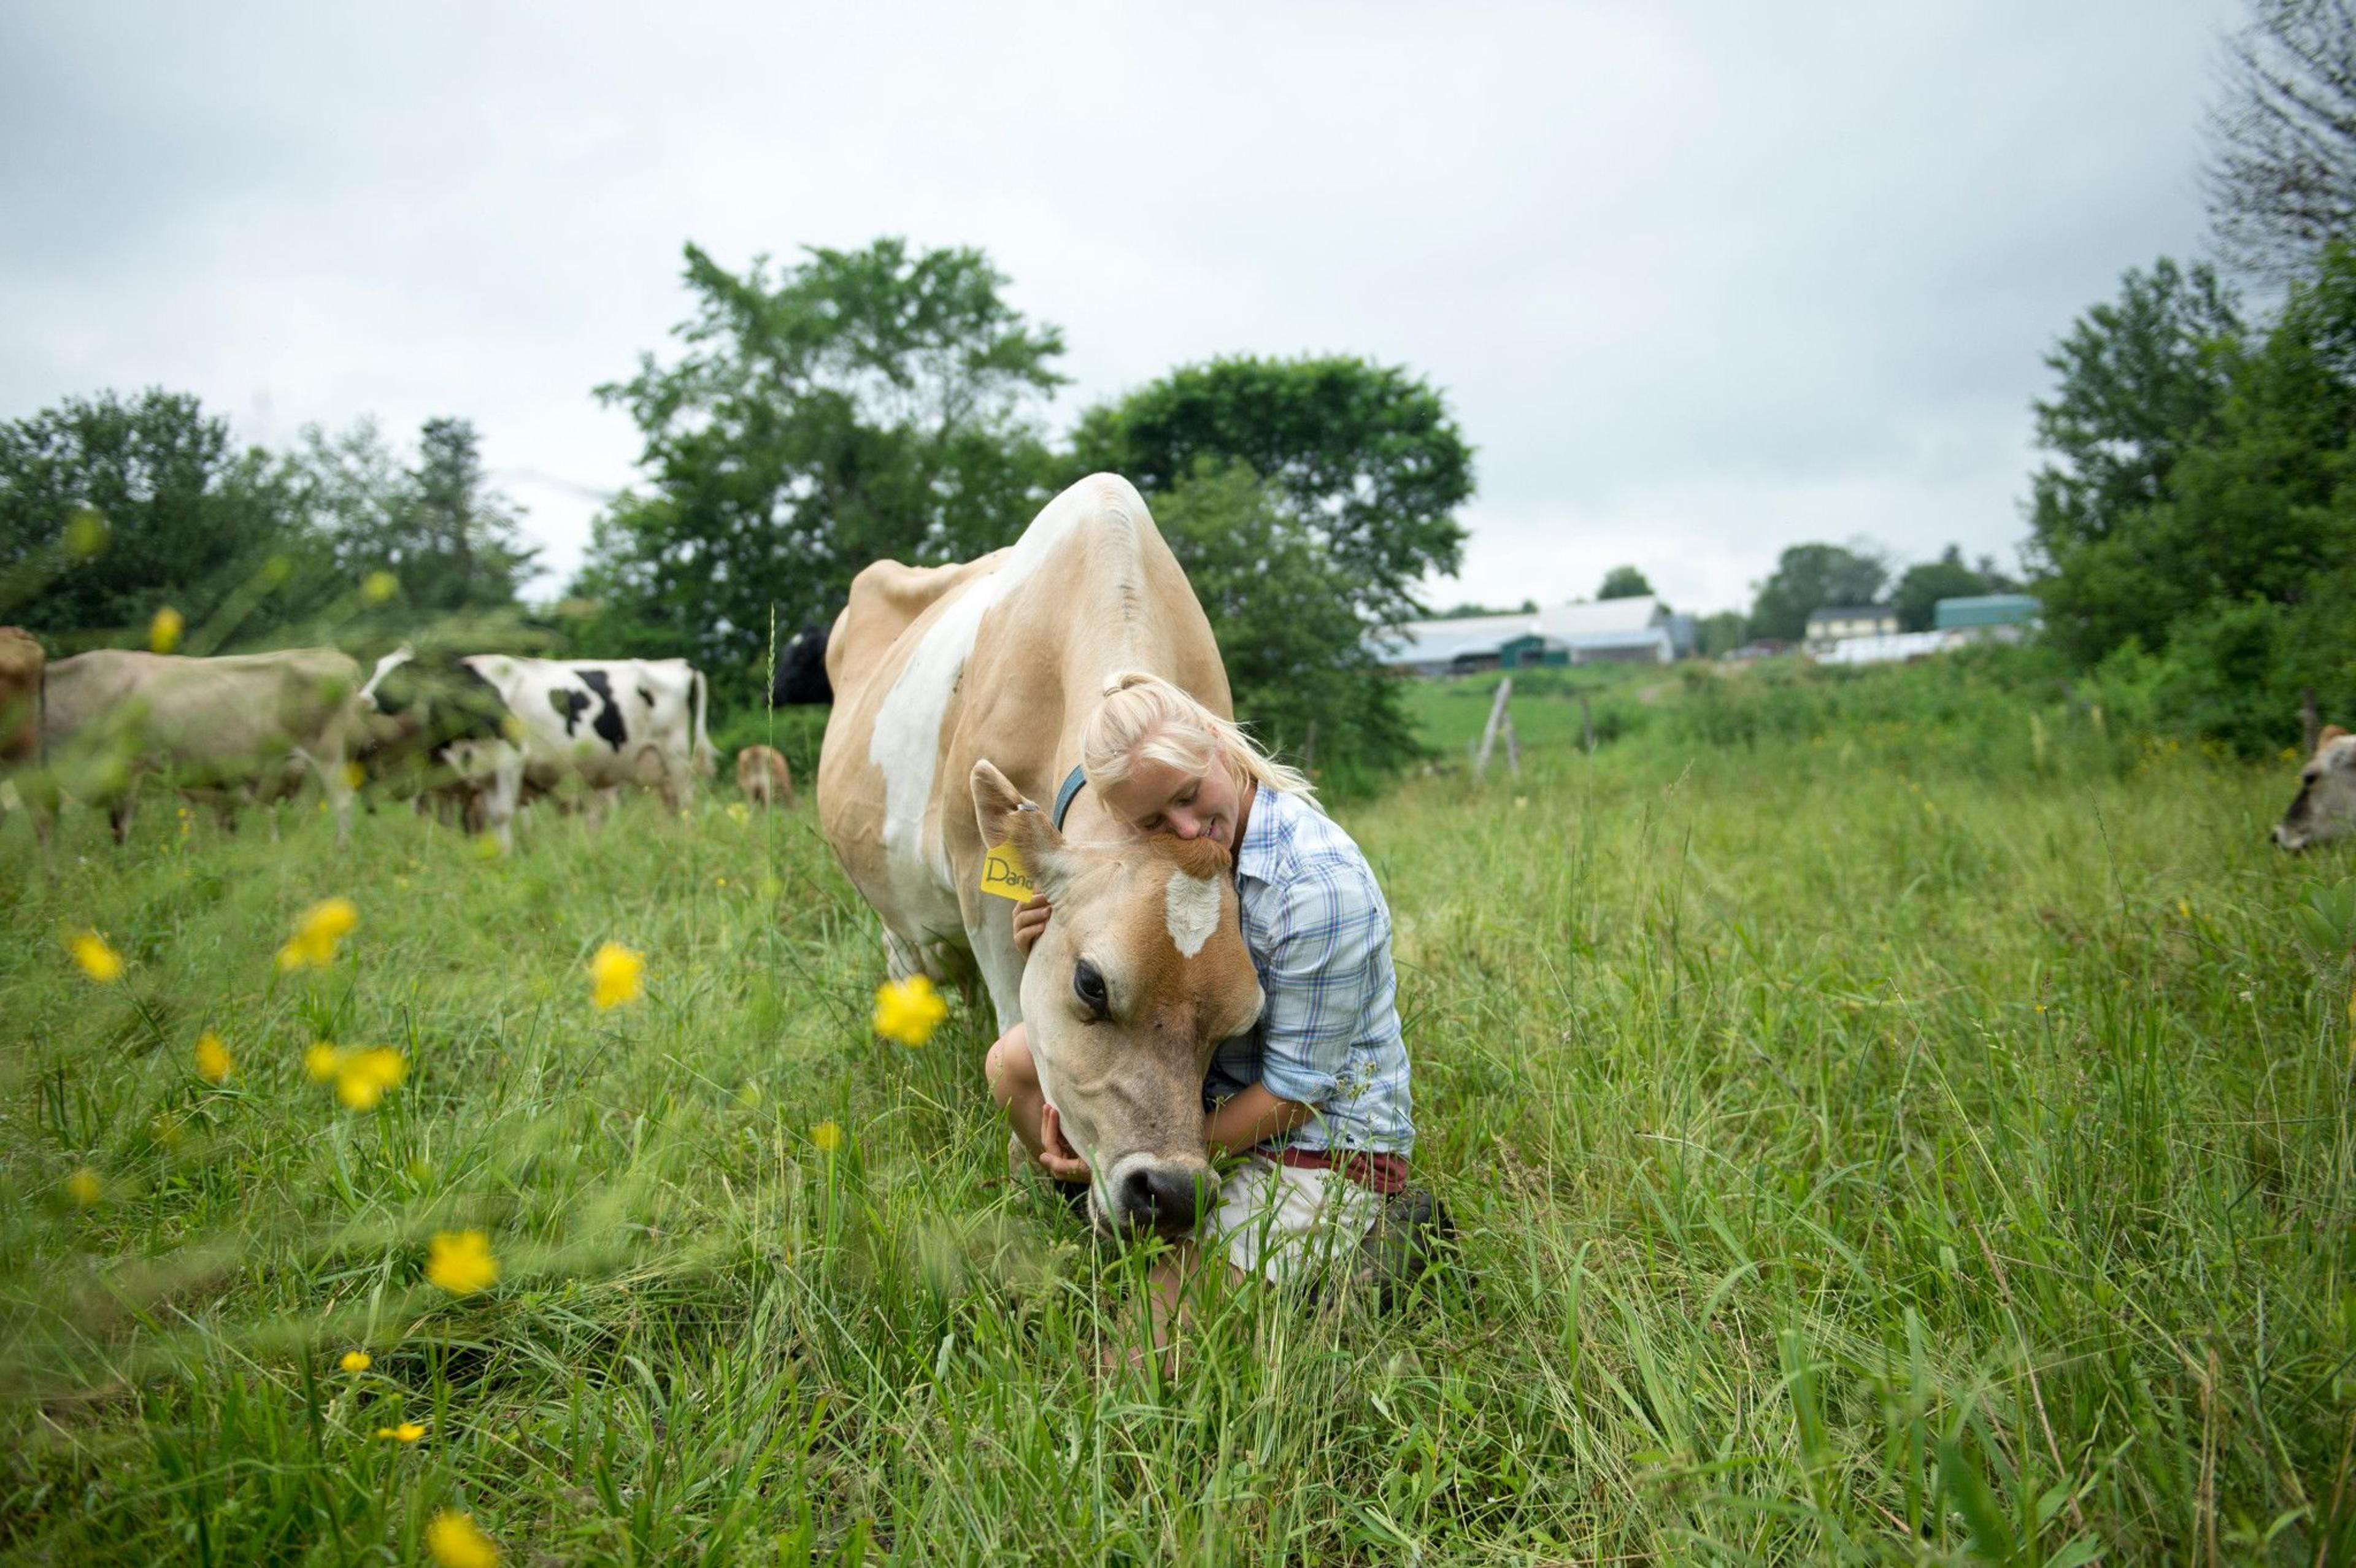 Cow cuddles at the Hartkopf farm in Maine.